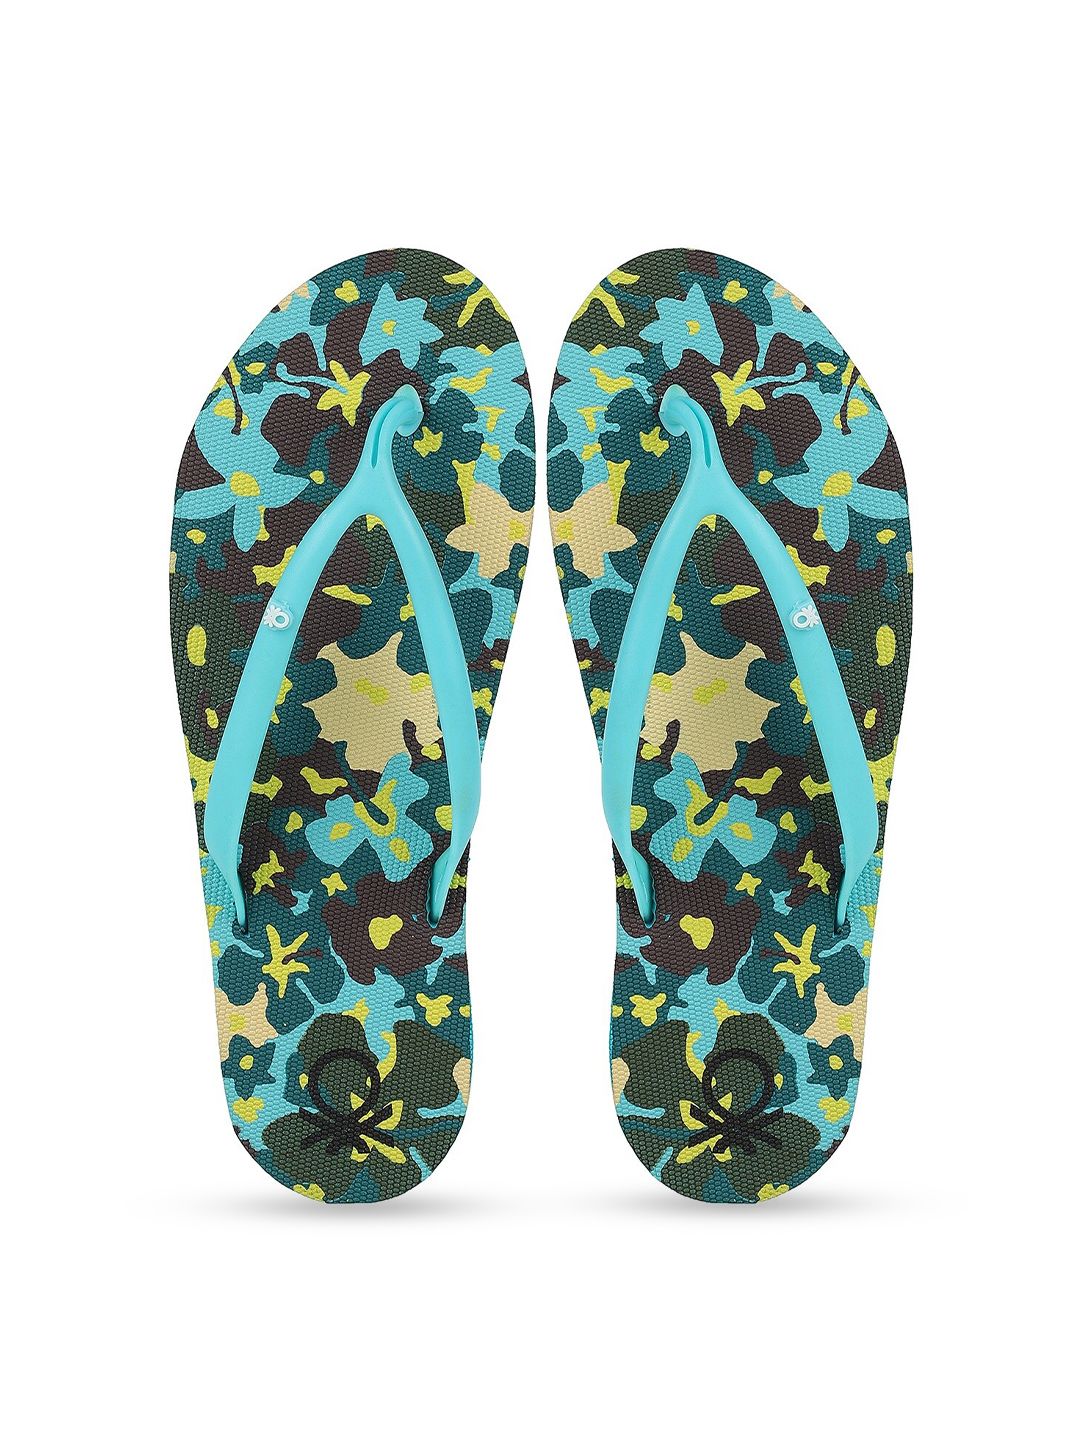 United Colors of Benetton Women Blue & Green Printed Rubber Thong Flip-Flops Price in India